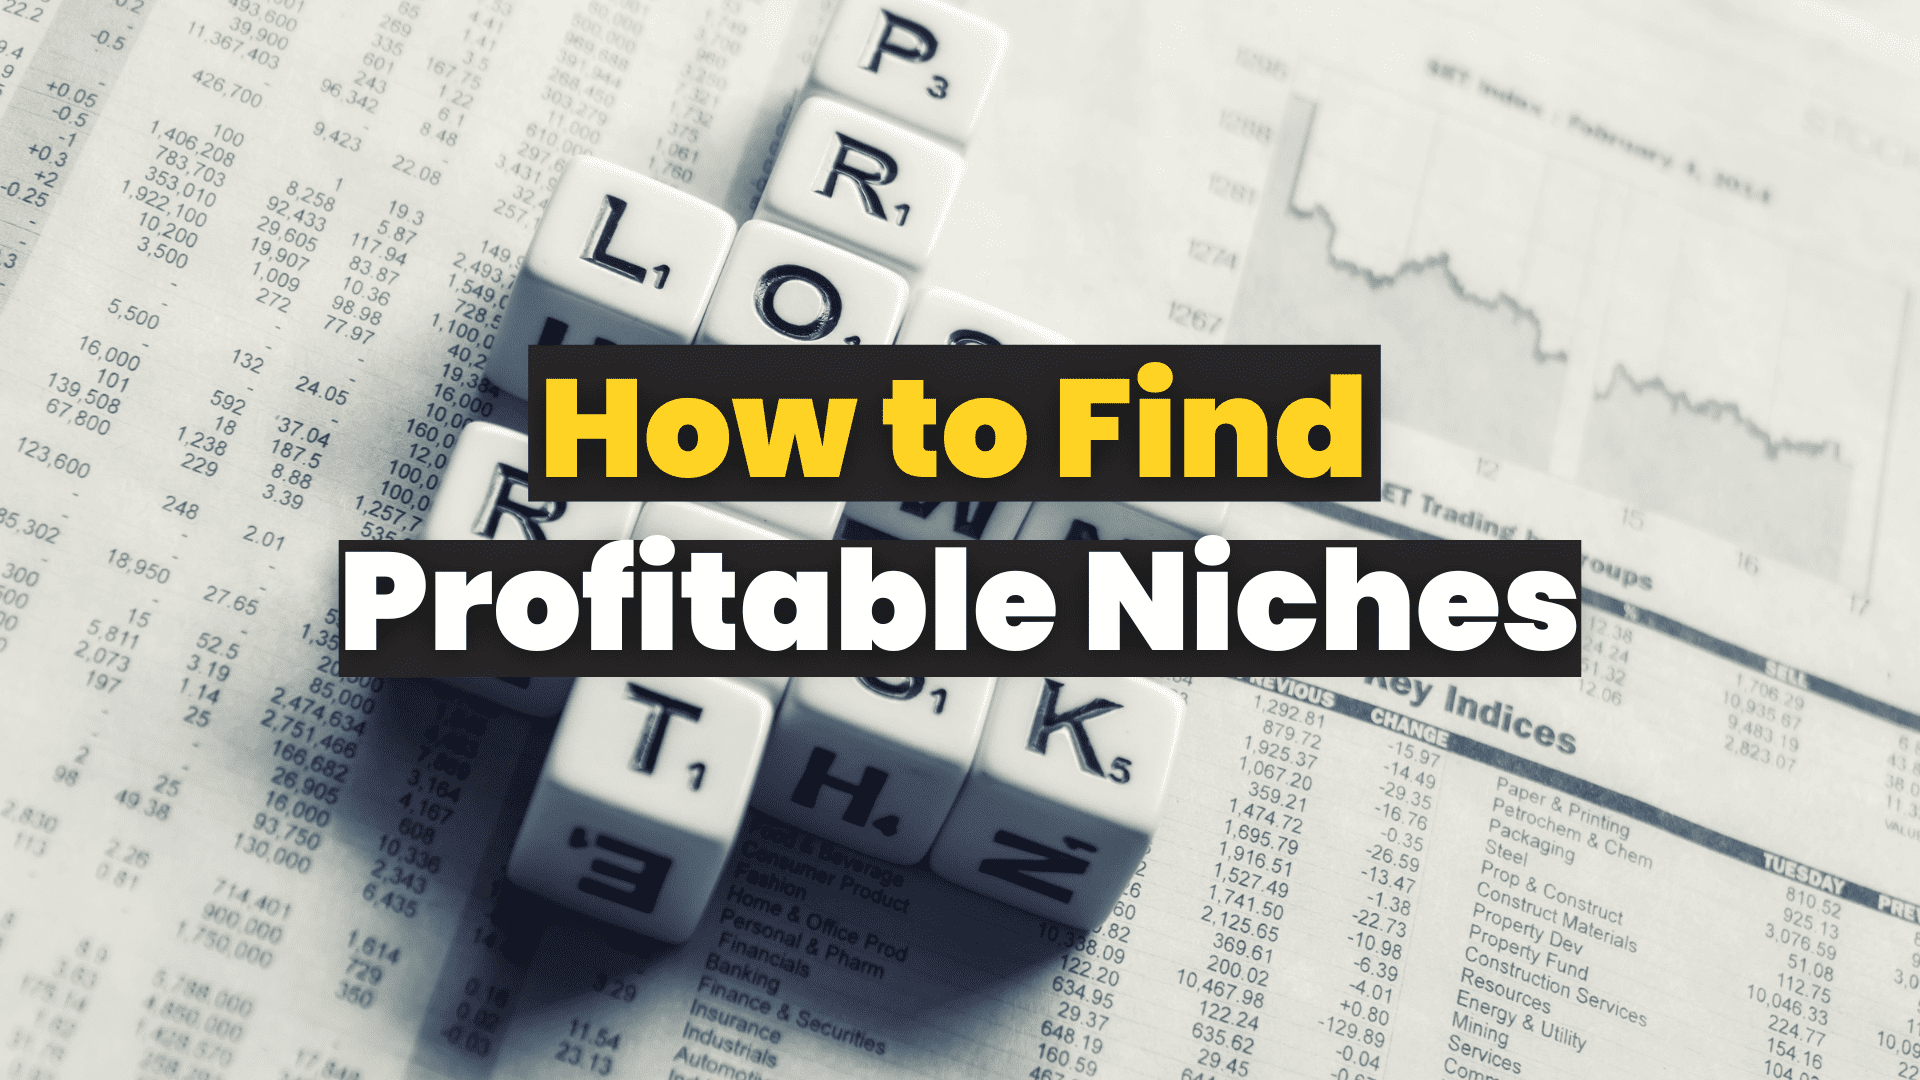 6 Tips on How to Find Profitable Niches on Amazon